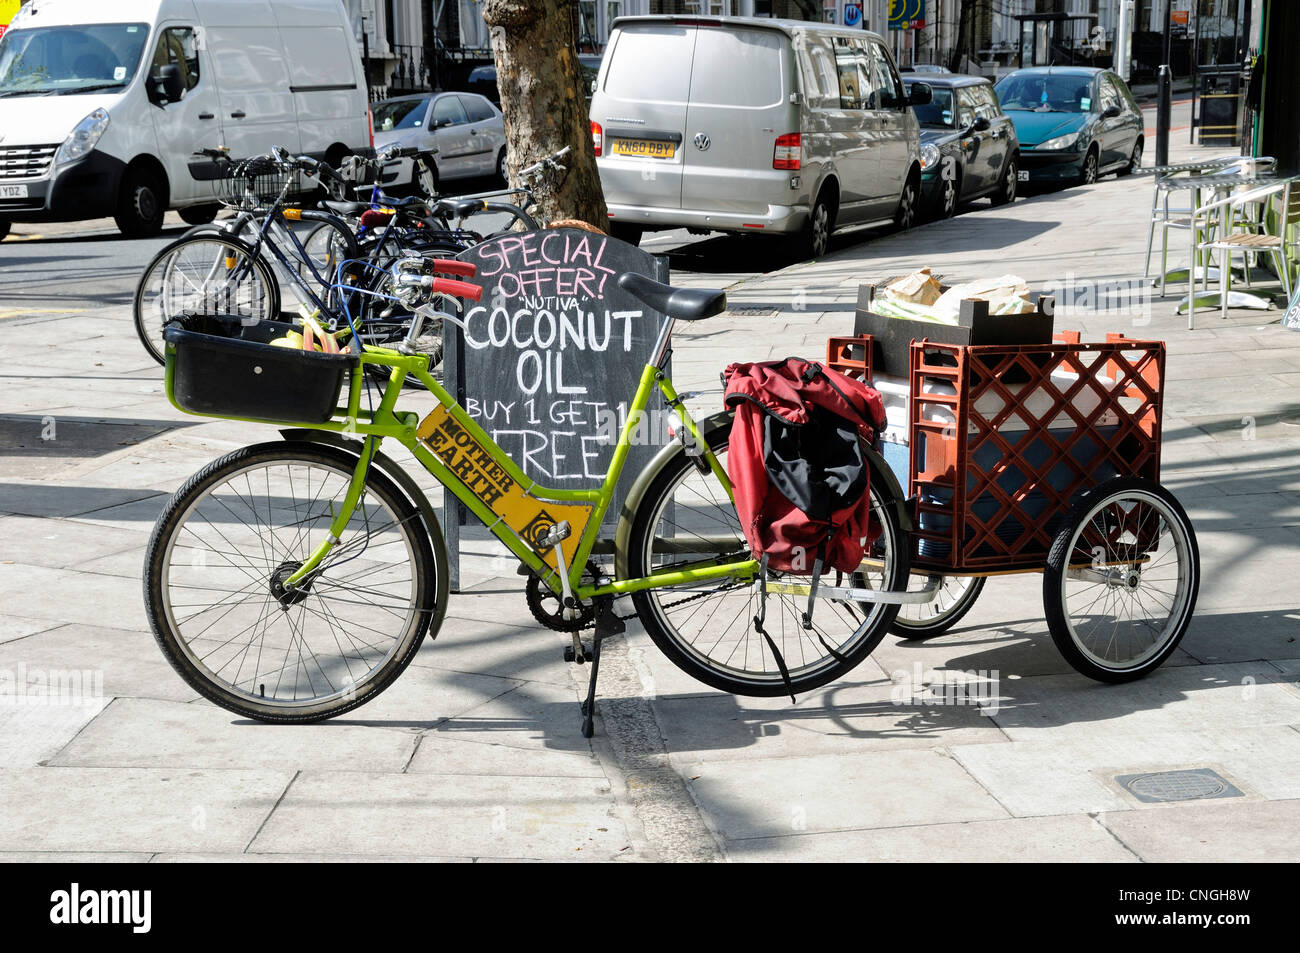 Delivery bicycle with trailer, Mother Earth shop, Newington Green, London Borough of Islington, England UK Stock Photo